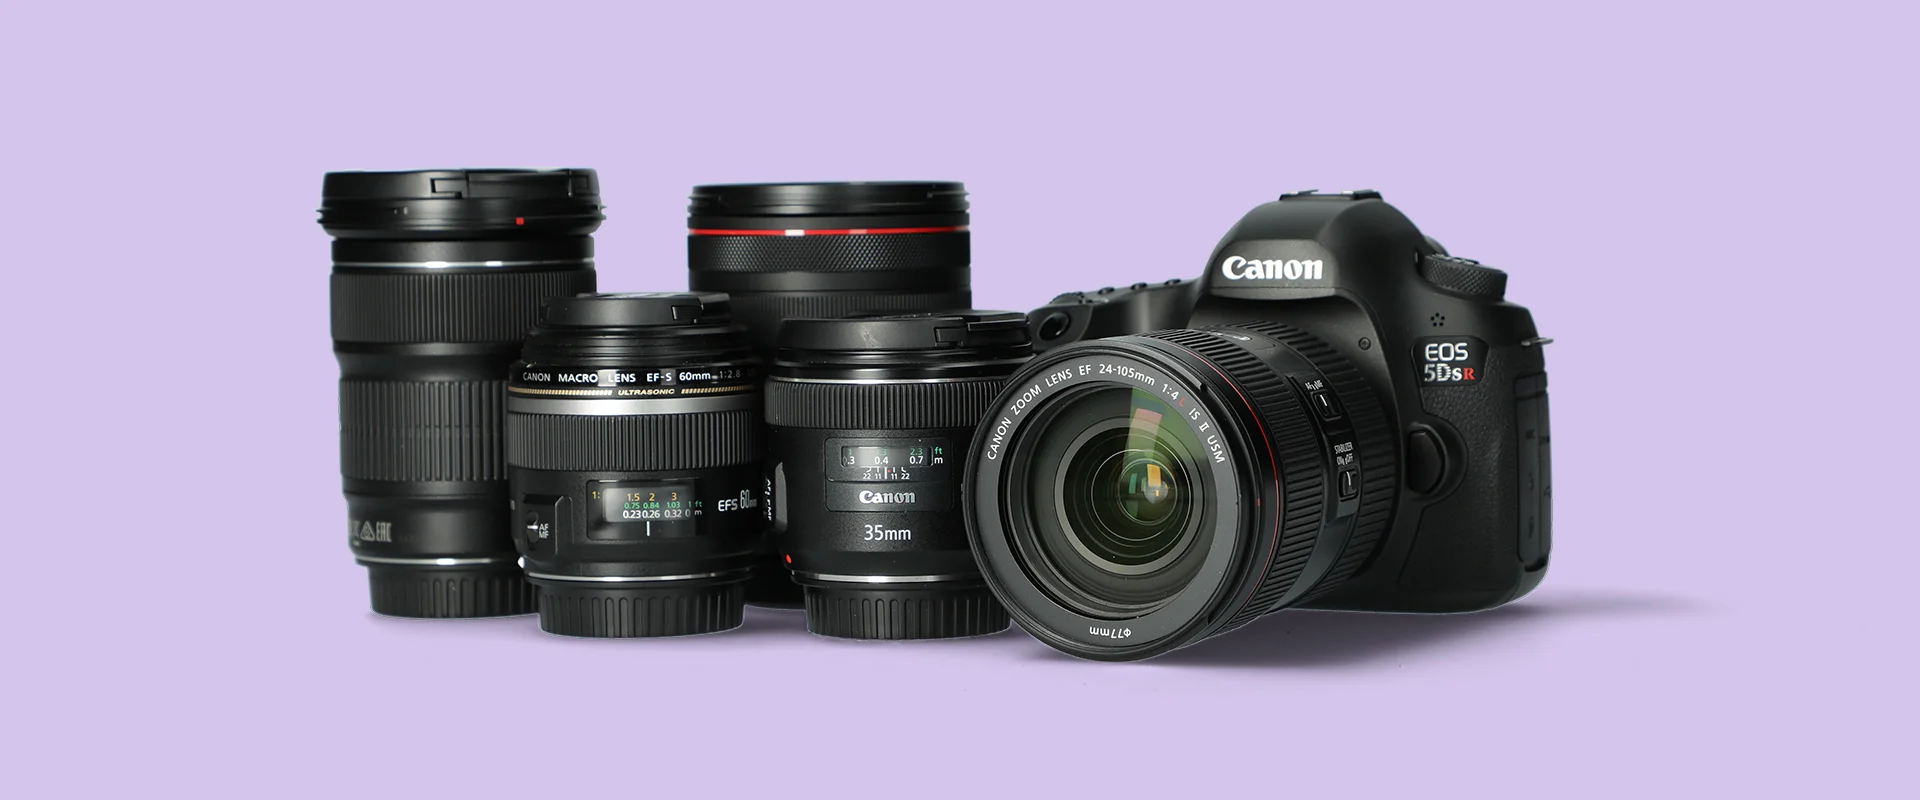 Best lens for product photography